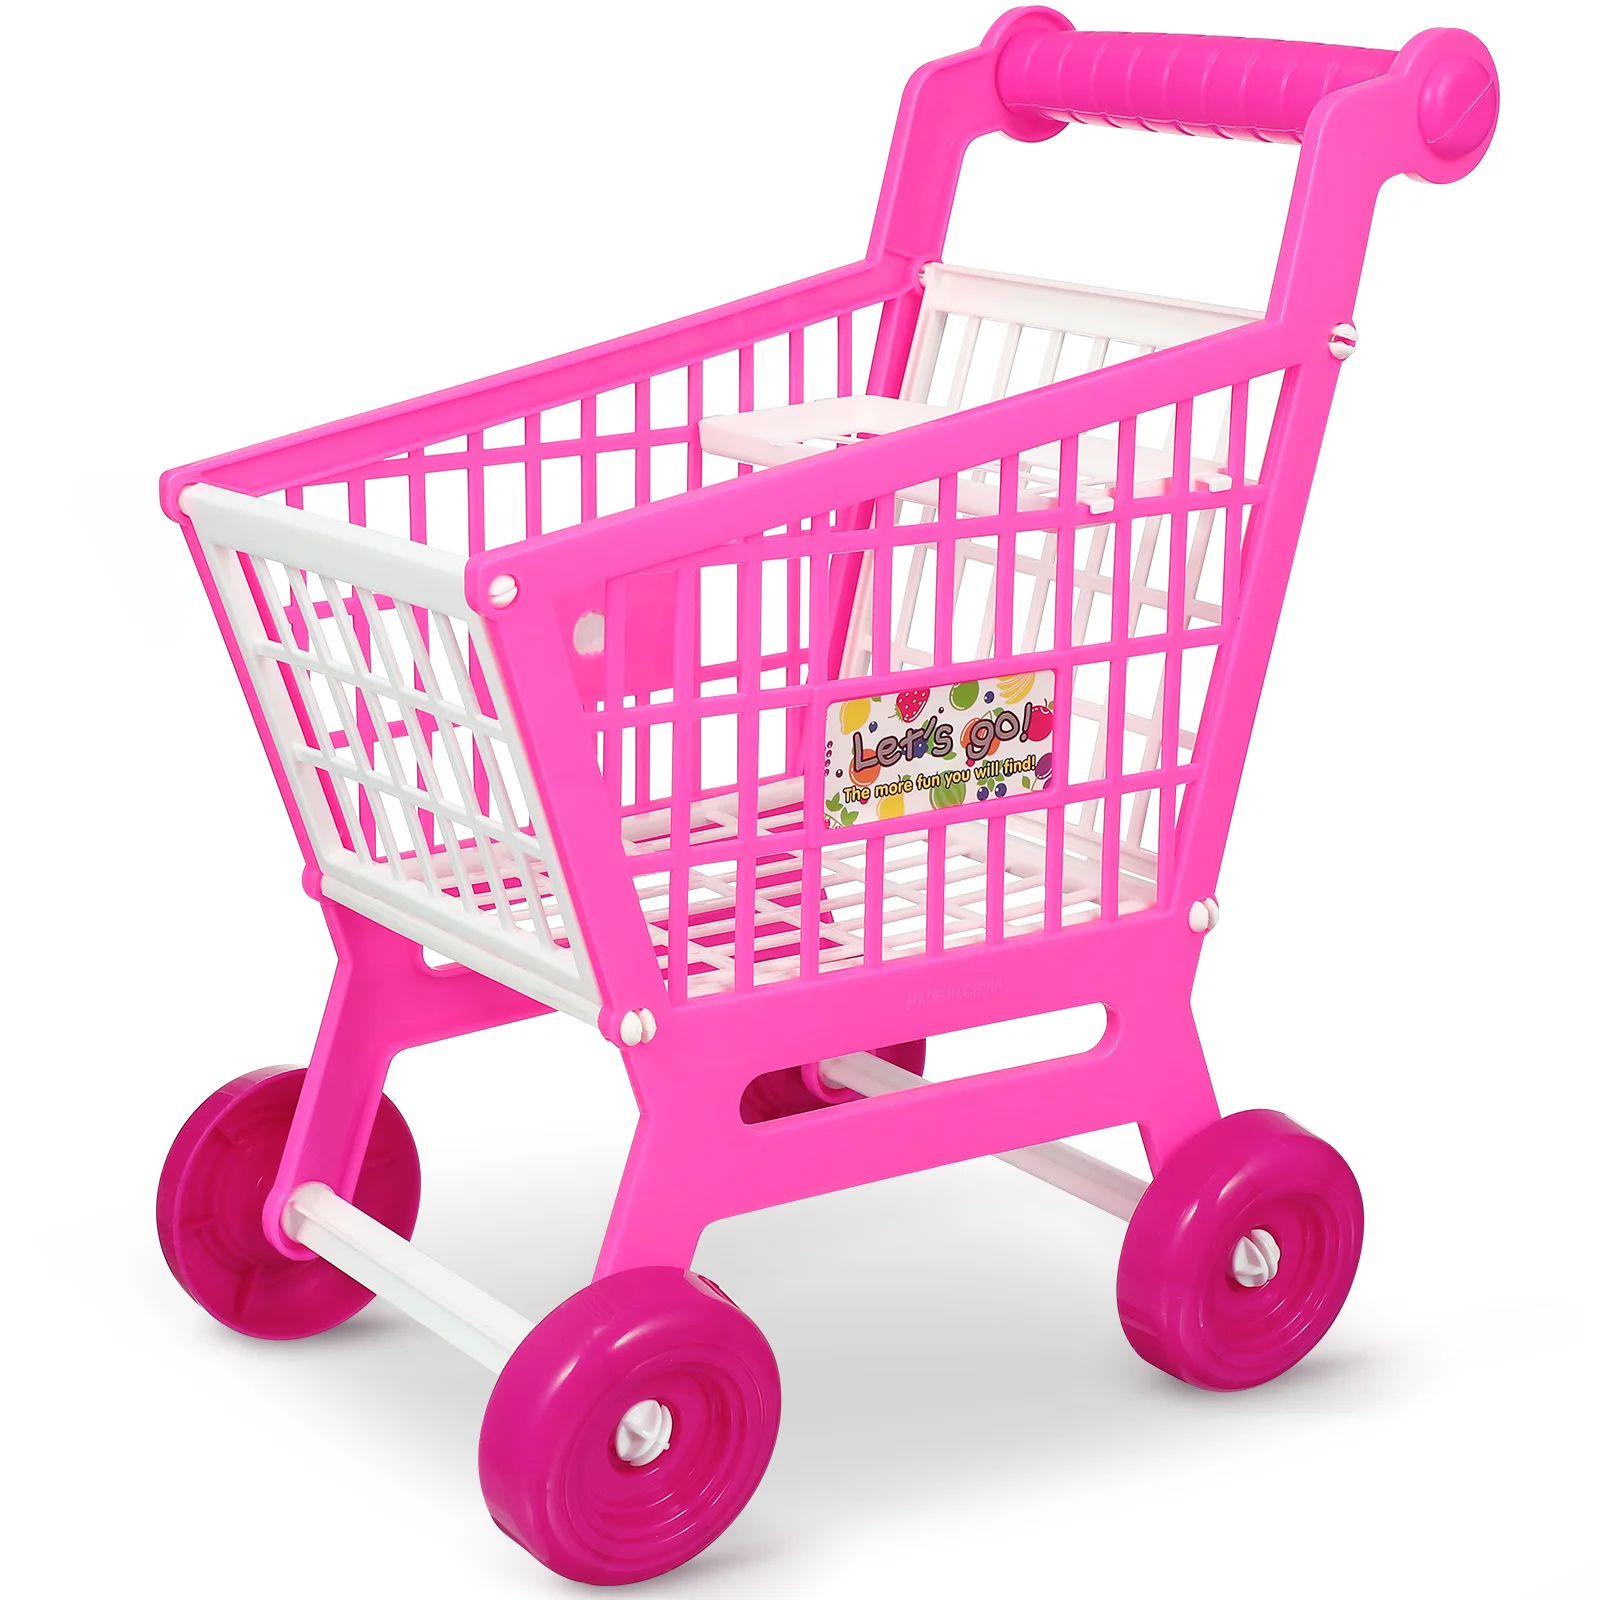 

Cart Shopping Kids Grocery Toy Play Toddler Mini Carts Toddlers Supermarket Store Pretend Plastic Baby Children 3 Toys